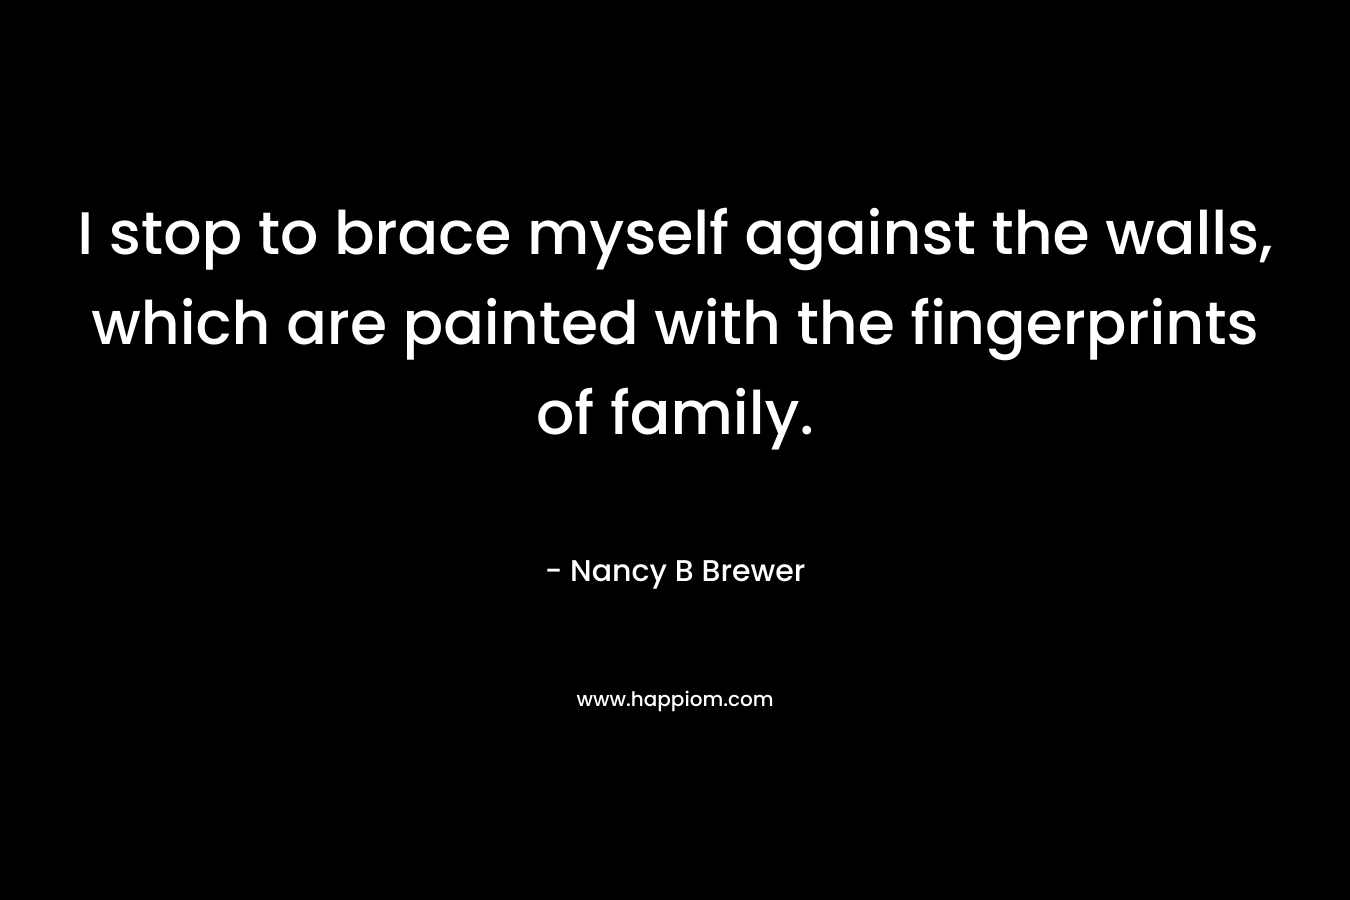 I stop to brace myself against the walls, which are painted with the fingerprints of family.